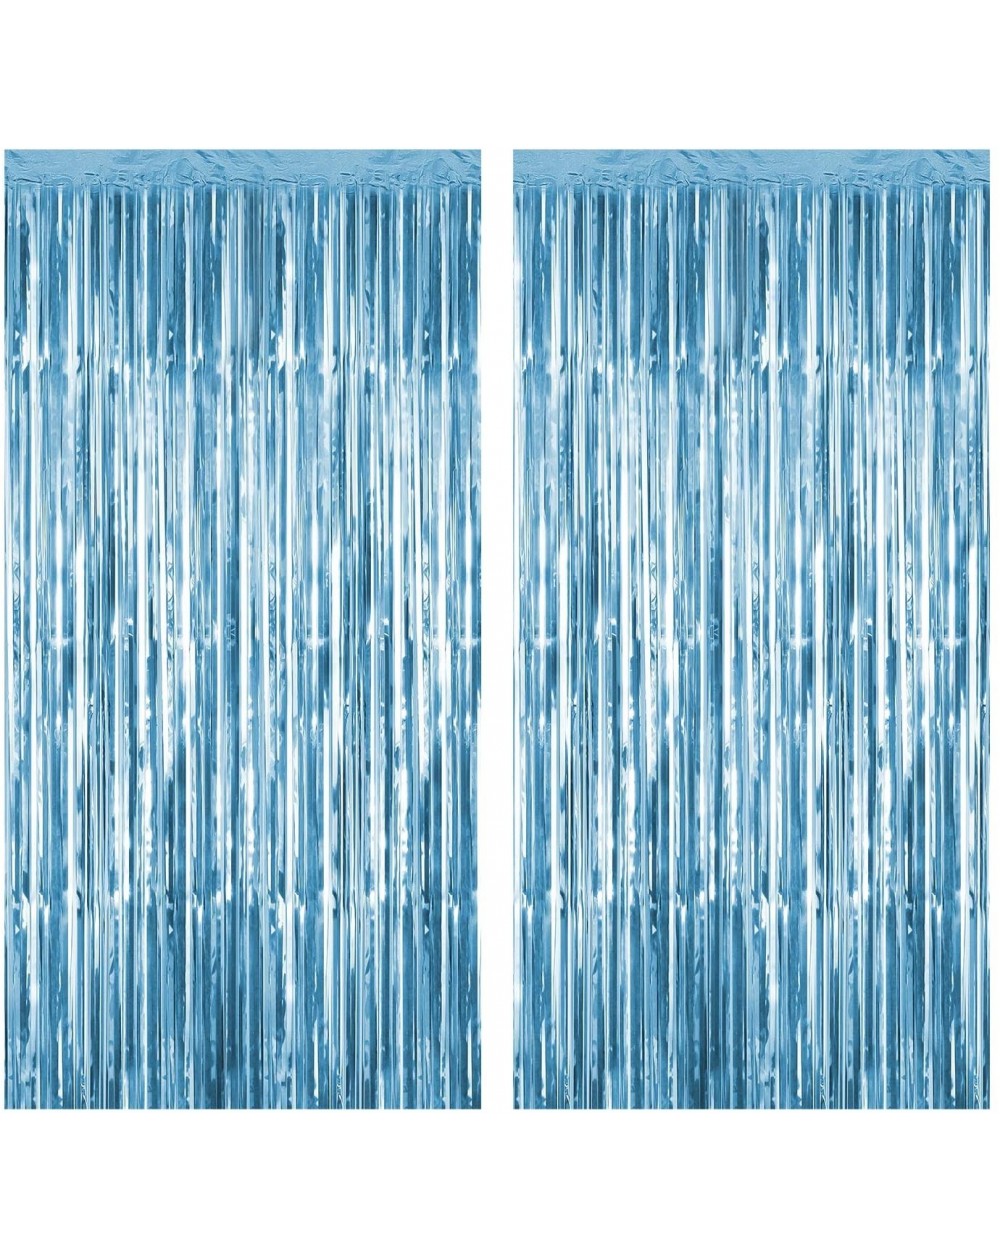 Photobooth Props Foil Fringe Curtains Metallic Tinsel Mylar Curtain for Party Photo Backdrop Wedding Decor (Light Blue- 2-Pac...